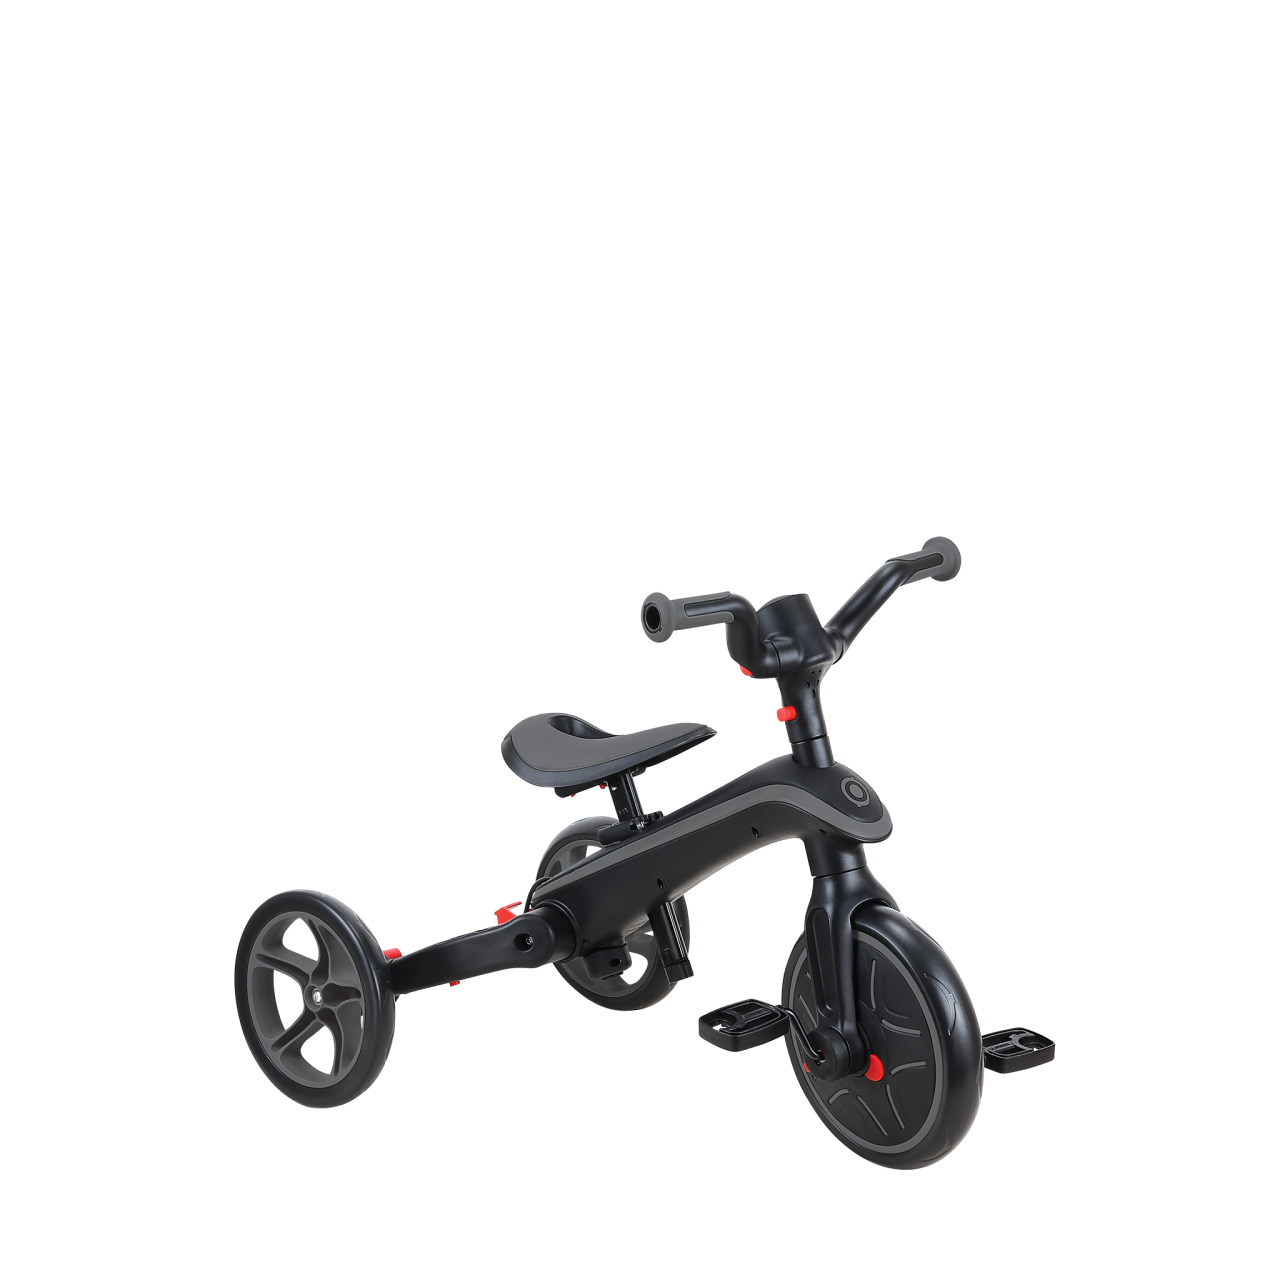 732 120 Foldable Tricycle Training Trike